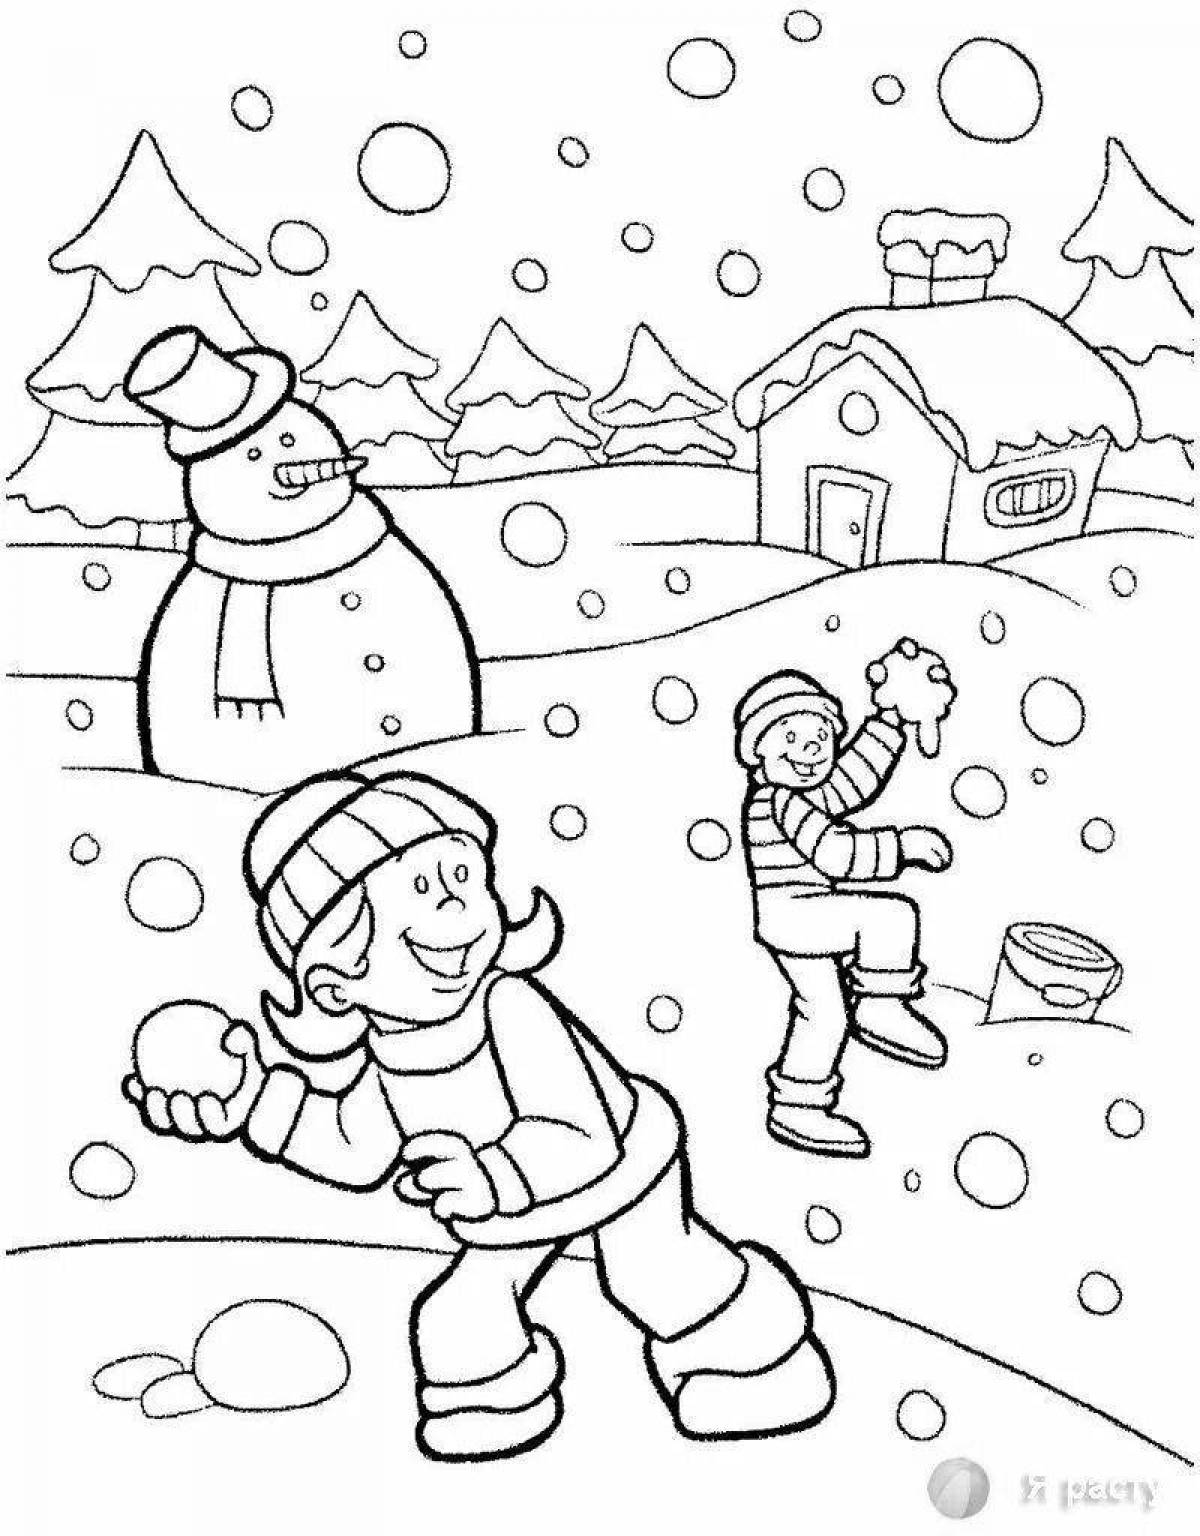 Radiant snowball fight coloring book for kids